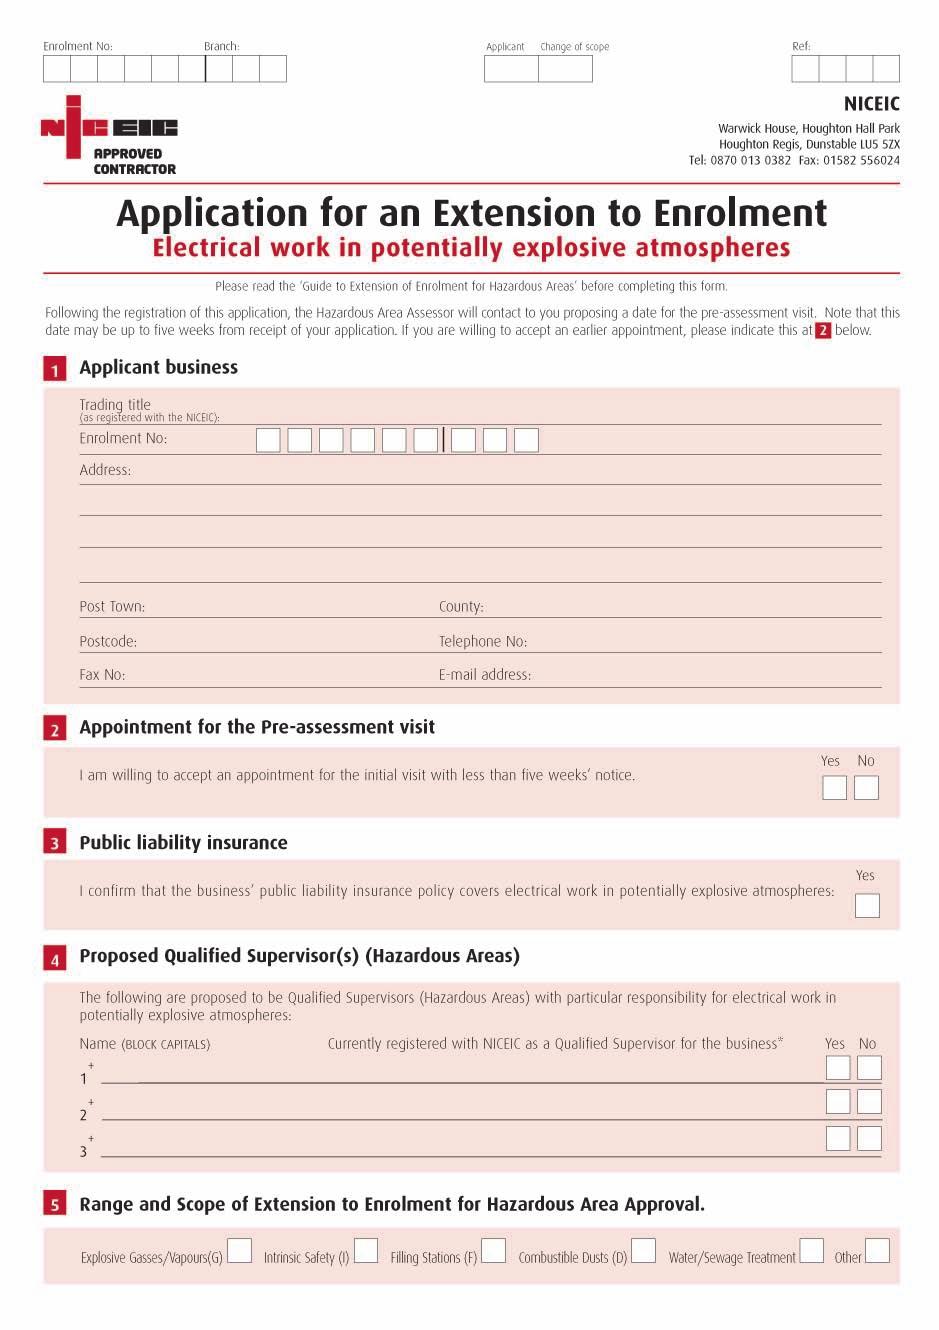 Completing the application form Section 1: Applicant business Completion of this section should be straightforward.